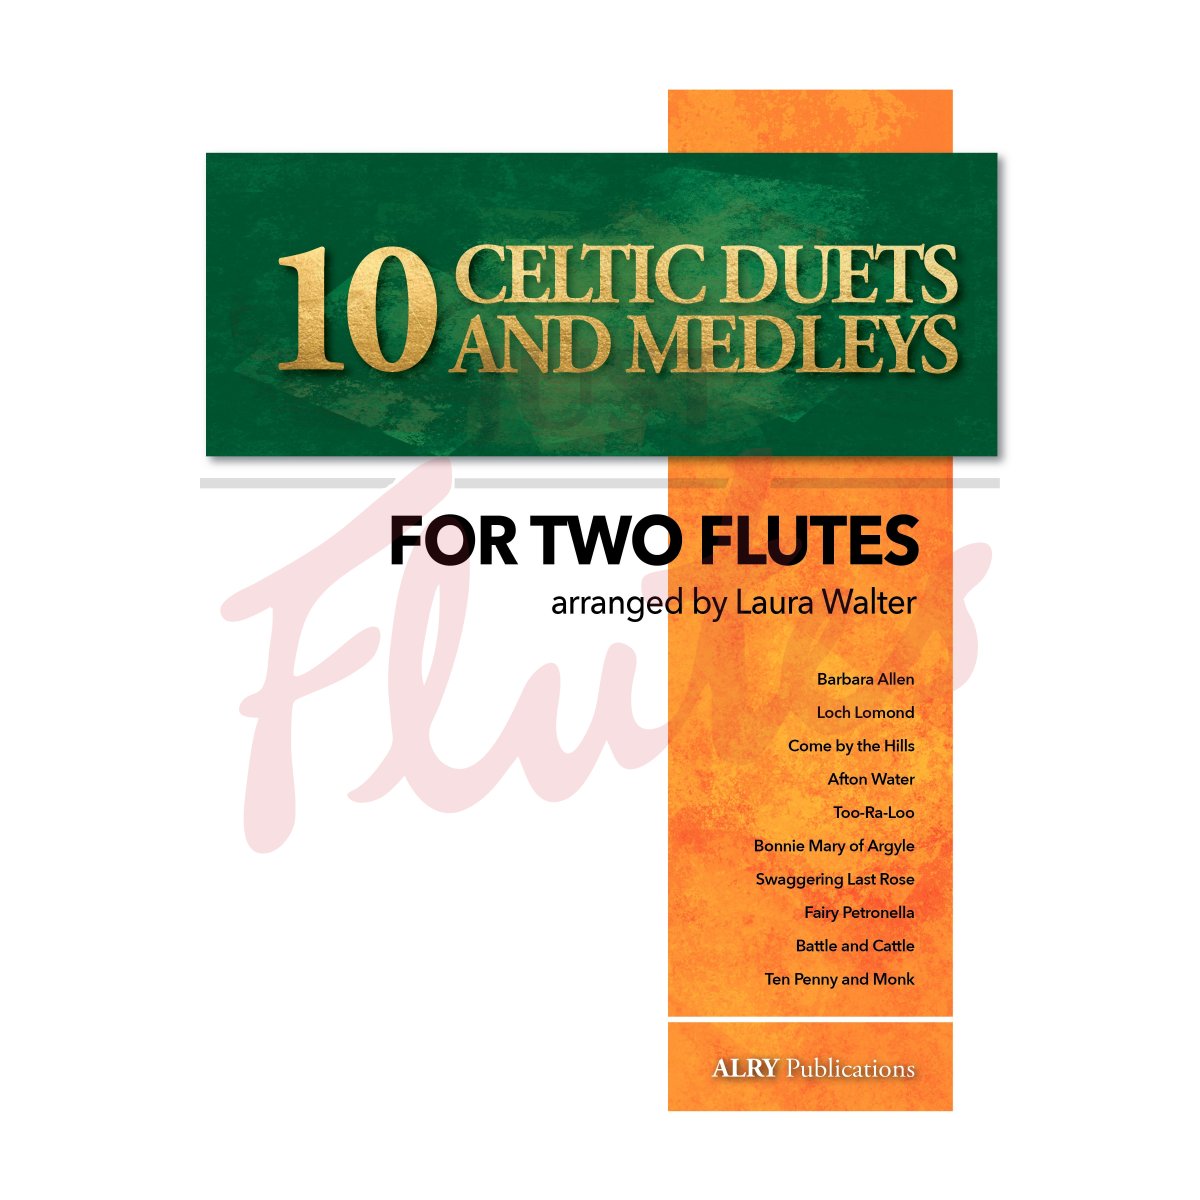 10 Celtic Duets and Medleys for Two Flutes (or Piccolos or Alto Flutes)